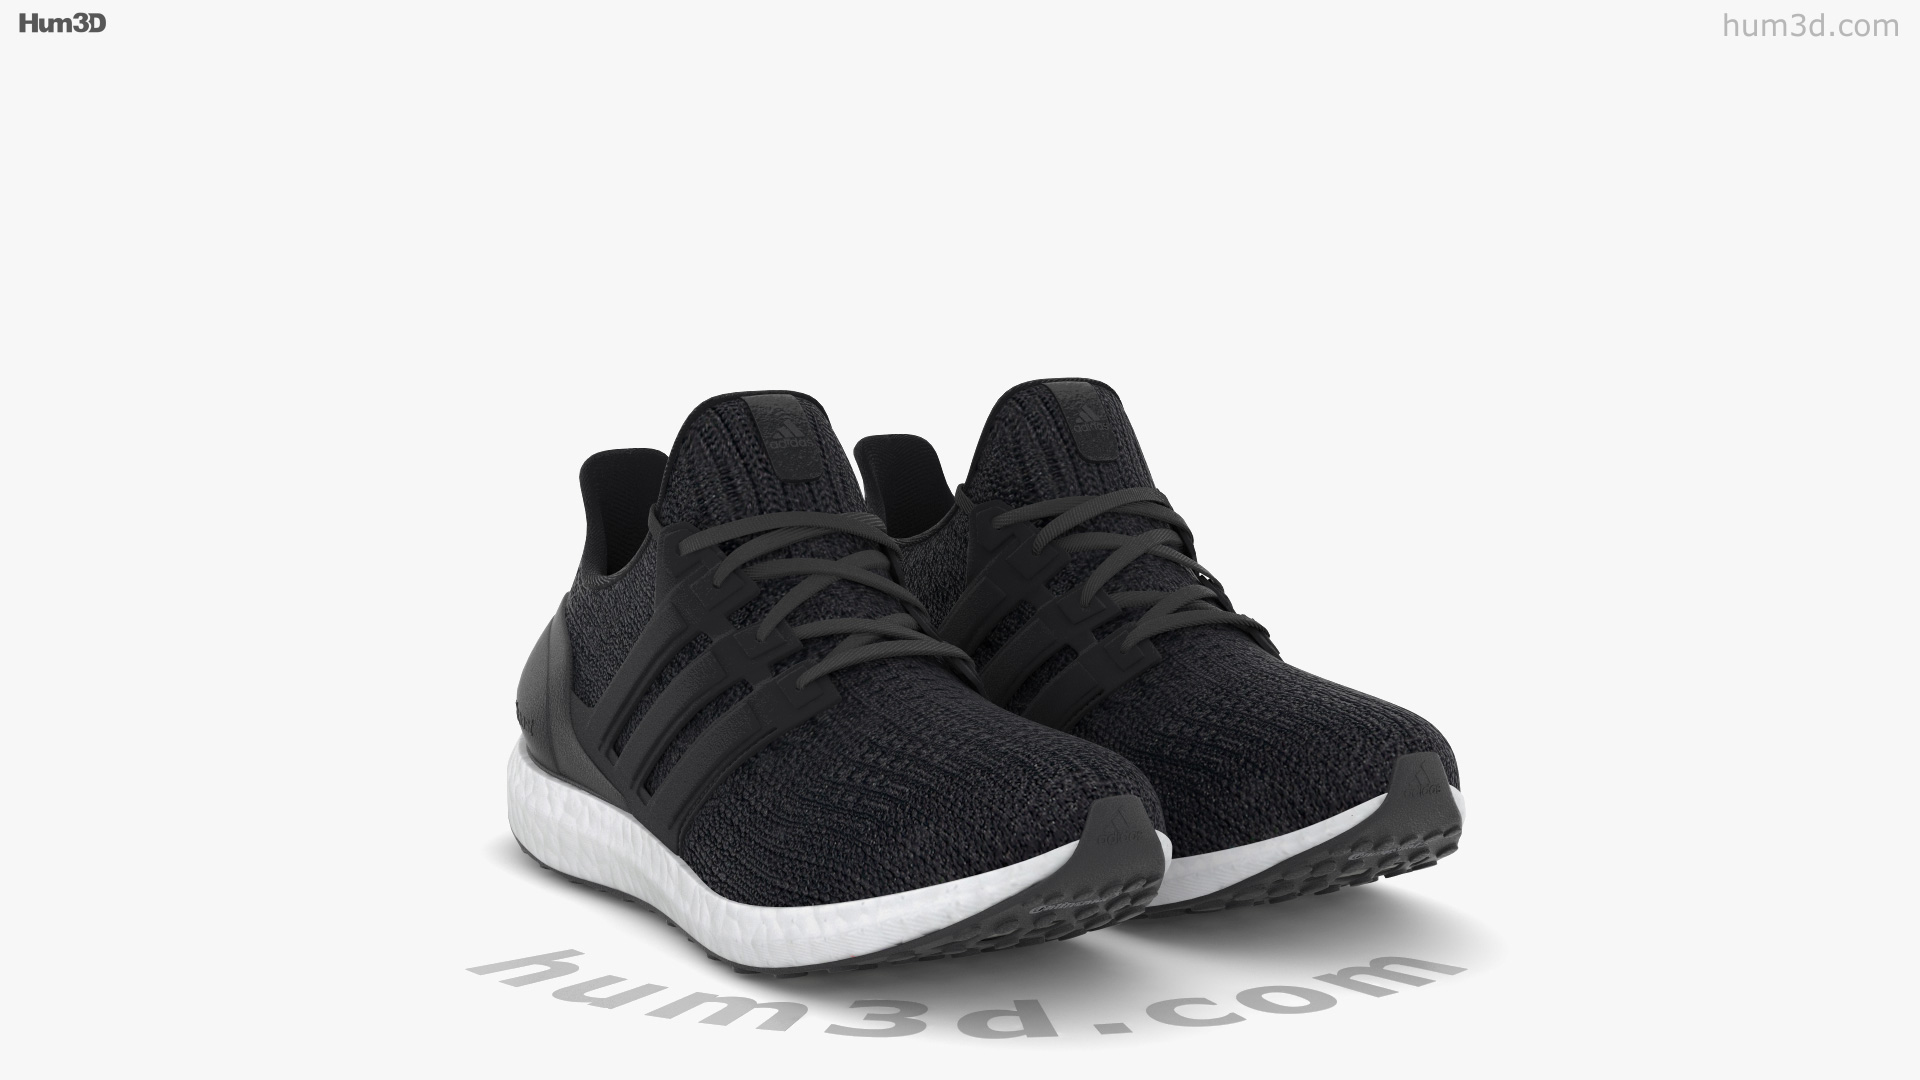 360 view of Adidas Ultra Boost 3D model - 3DModels store